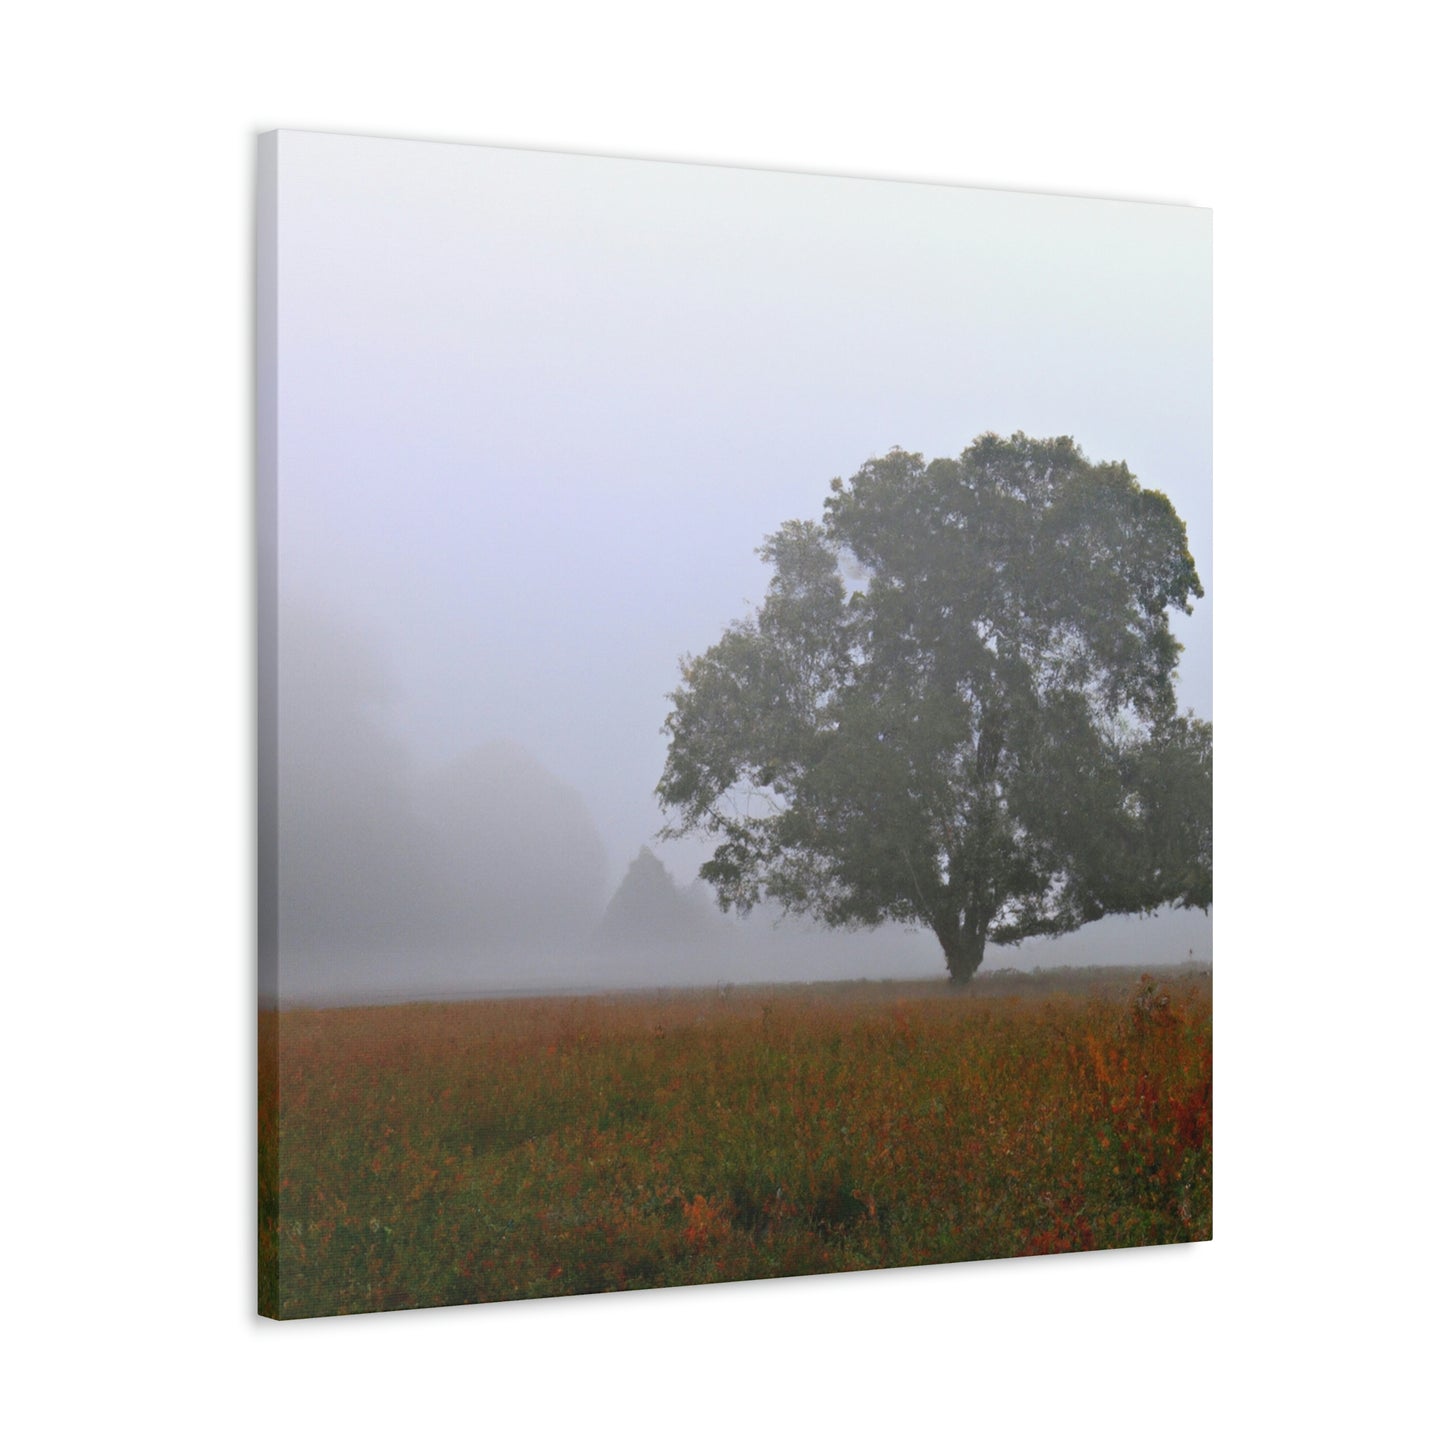 The Lonely Tree in the Foggy Meadow - The Alien Canva